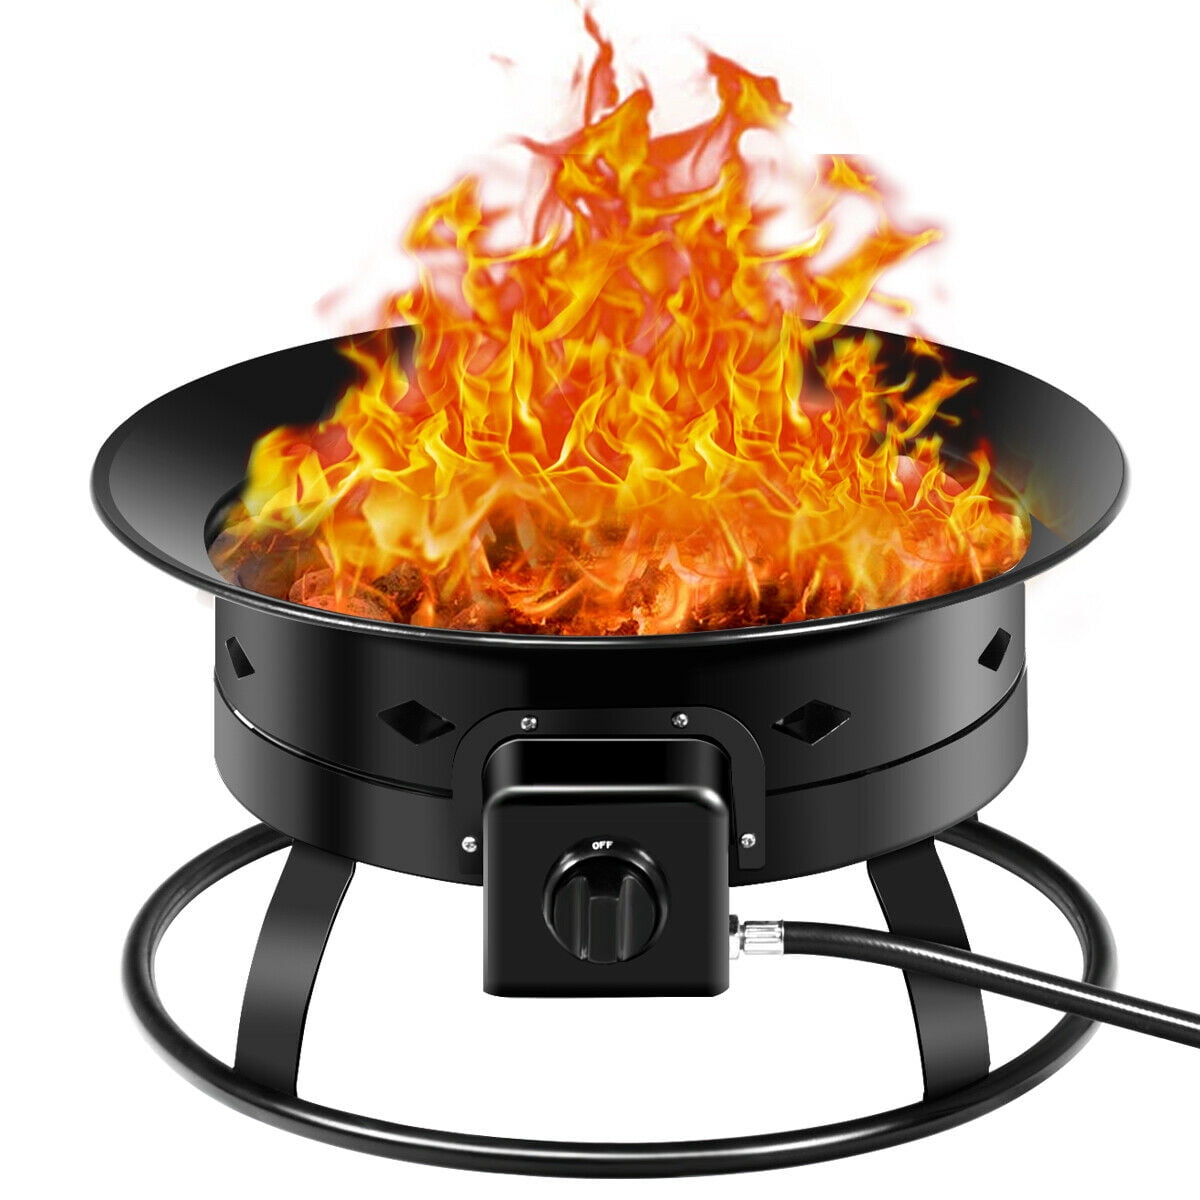 Gymax Portable Propane Outdoor Gas Fire Pit W/ Cover & Carry Kit 19-Inch  58,000 BTU - Walmart.com